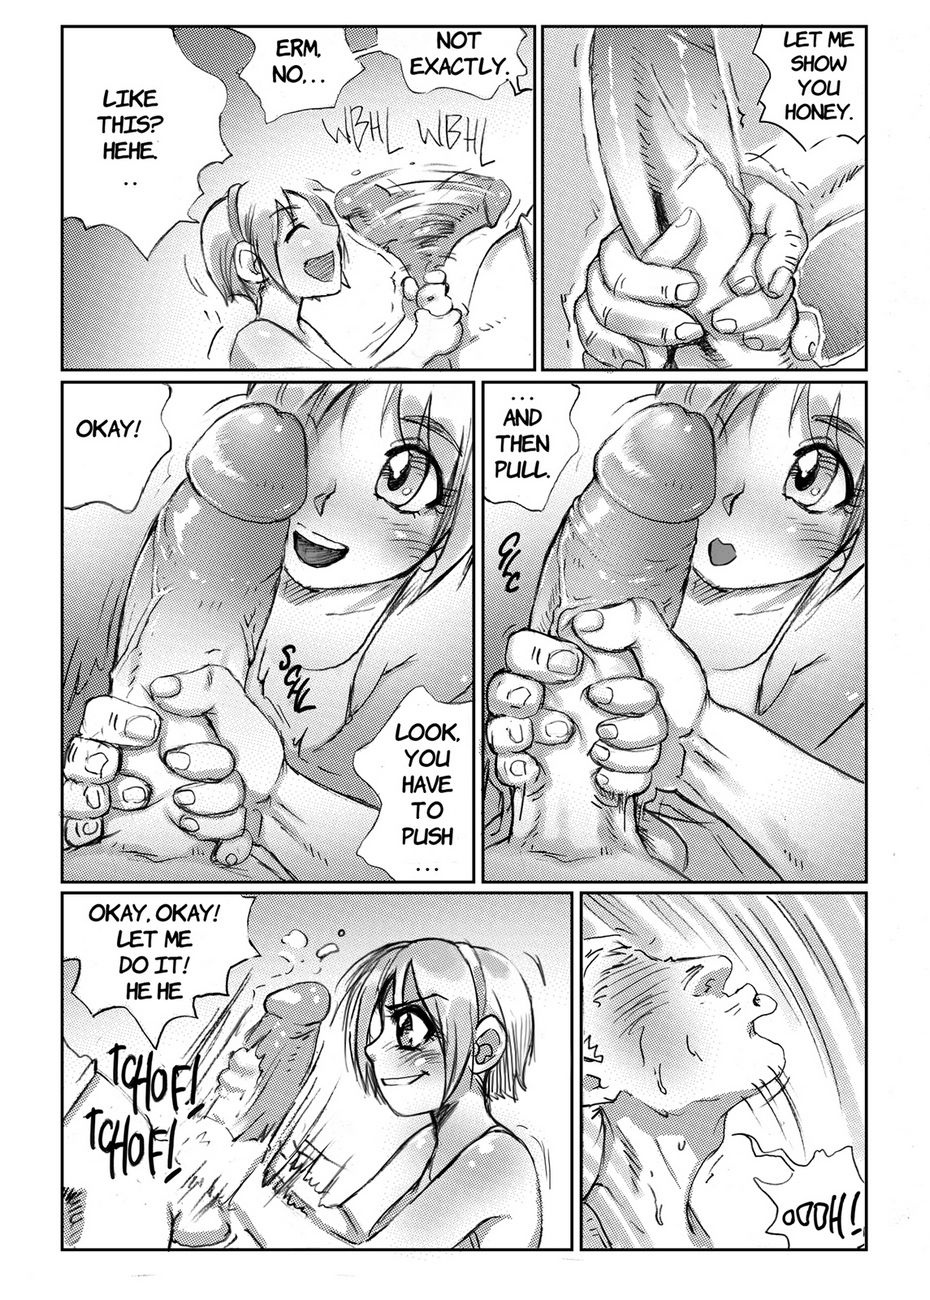 Sidney 1 page 7